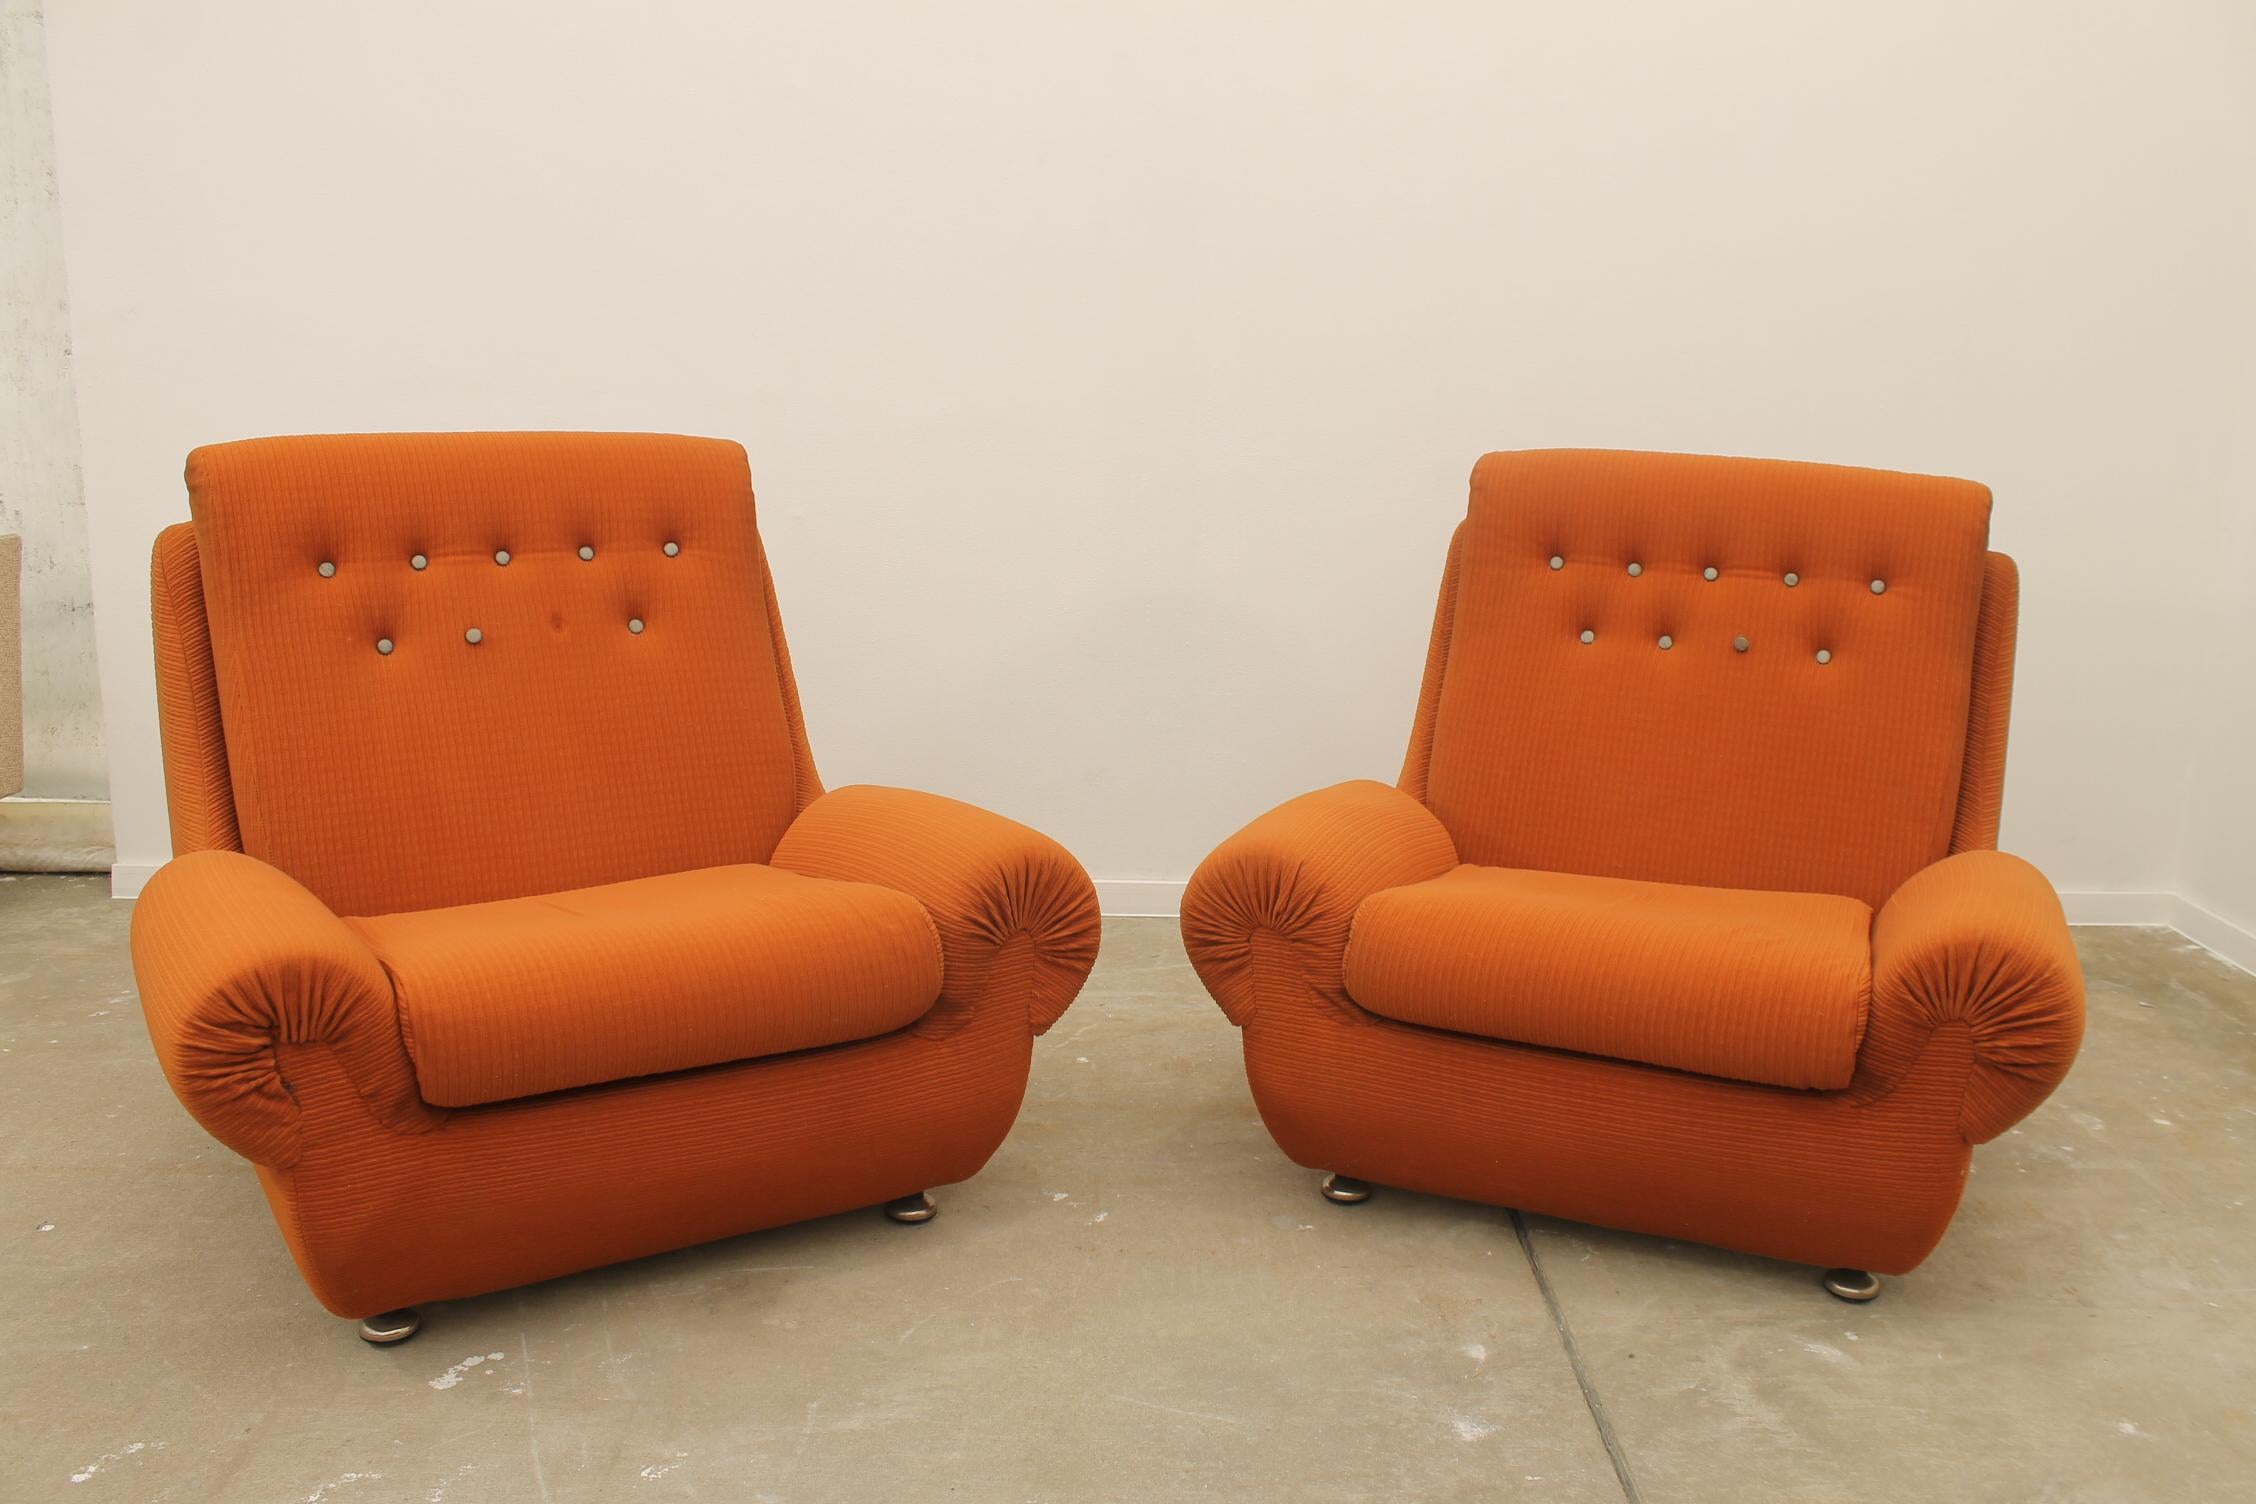 These armchairs was a part of a living room set made by JITONA company in the 1970´s.
They represent a typical example of furniture design of the 1970/1980s years of the 20th Century ´s in the former Czechoslovakia. 
The furniture is very